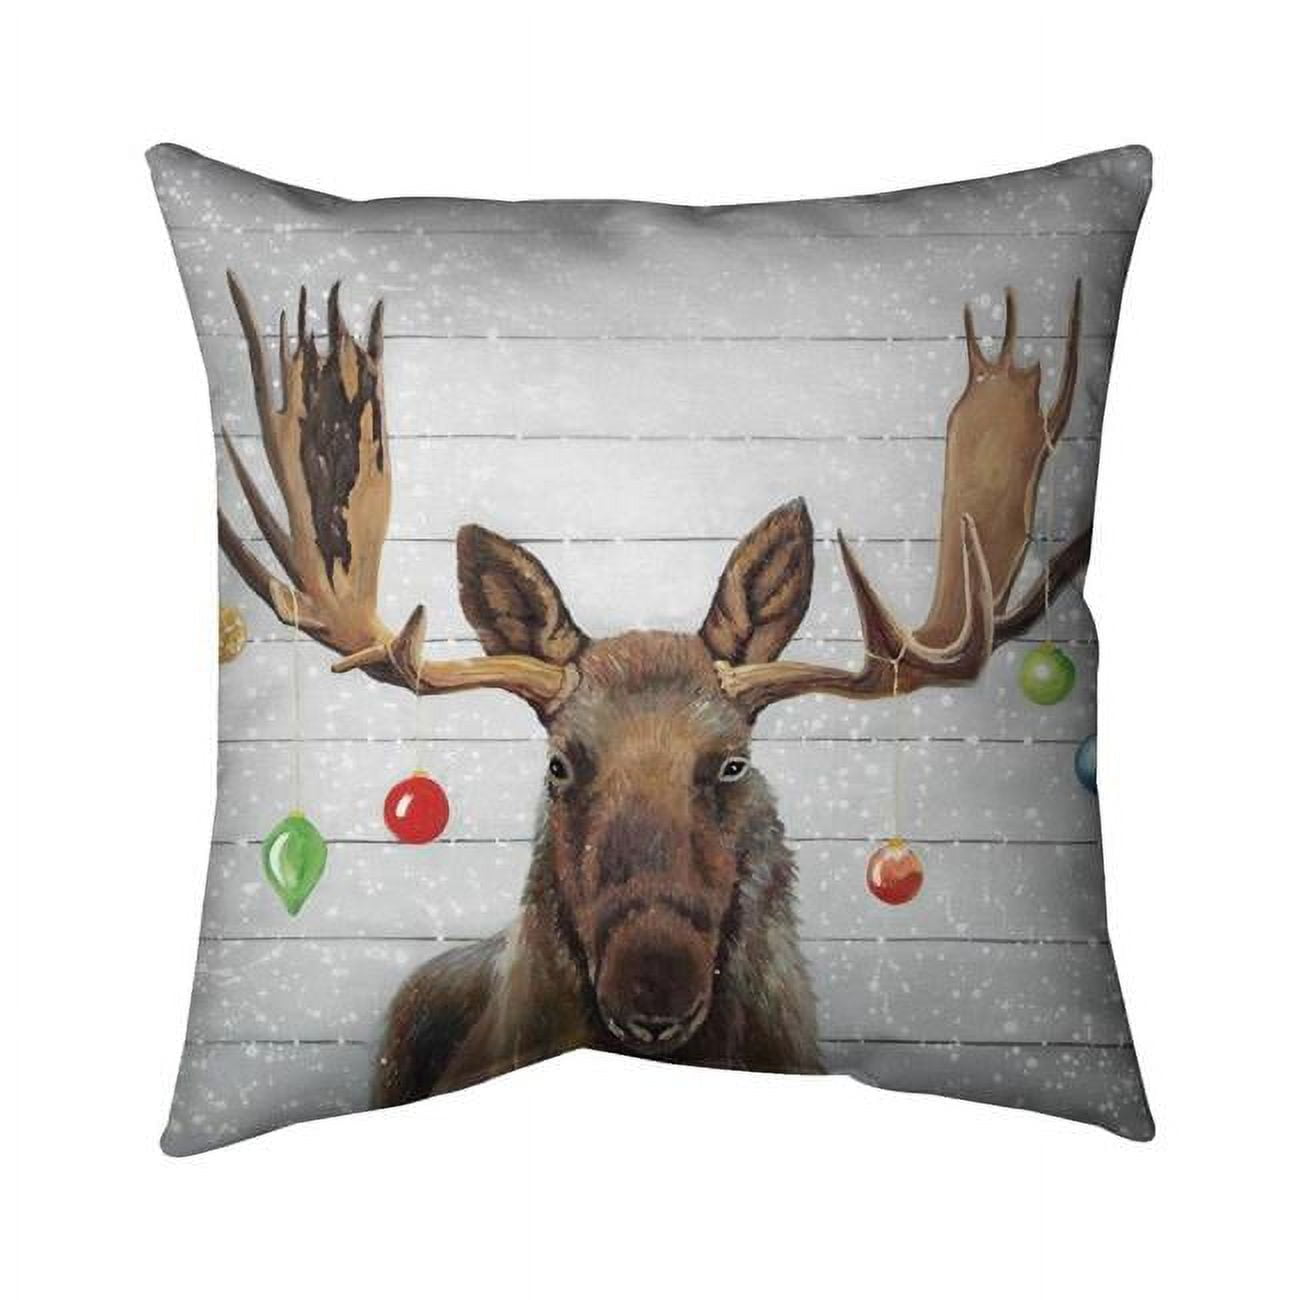 Begin Home Decor 5543-2020-HO26 20 x 20 in. Moose Has Christmas Balls-Double Sided Print Indoor Pillow Cover